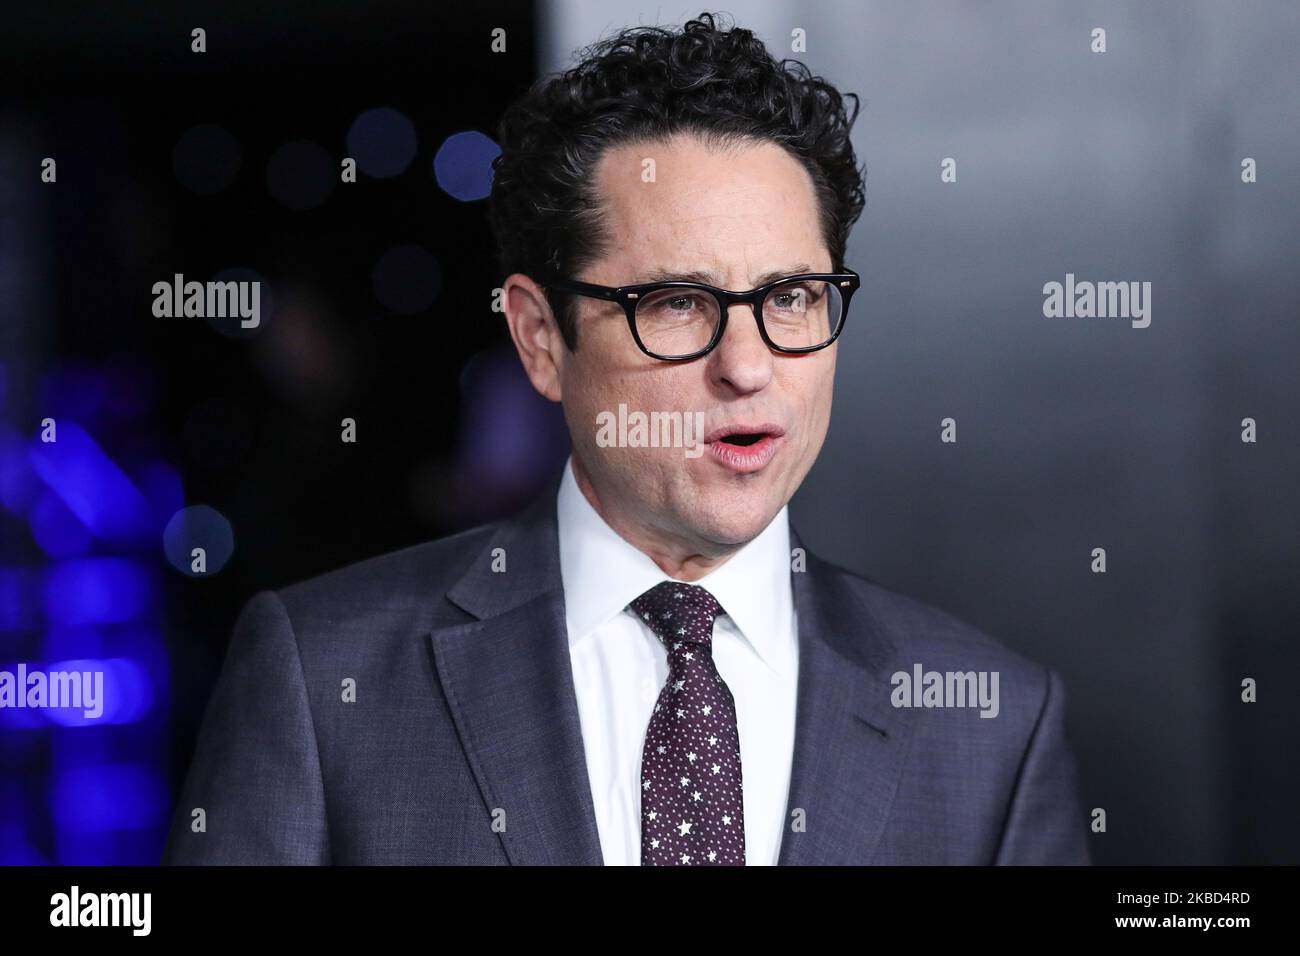 HOLLYWOOD, LOS ANGELES, CALIFORNIA, USA - DECEMBER 16: Director J.J. Abrams arrives at the World Premiere Of Disney's 'Star Wars: The Rise Of Skywalker' held at the El Capitan Theatre on December 16, 2019 in Hollywood, Los Angeles, California, United States. (Photo by Xavier Collin/Image Press Agency/NurPhoto) Stock Photo